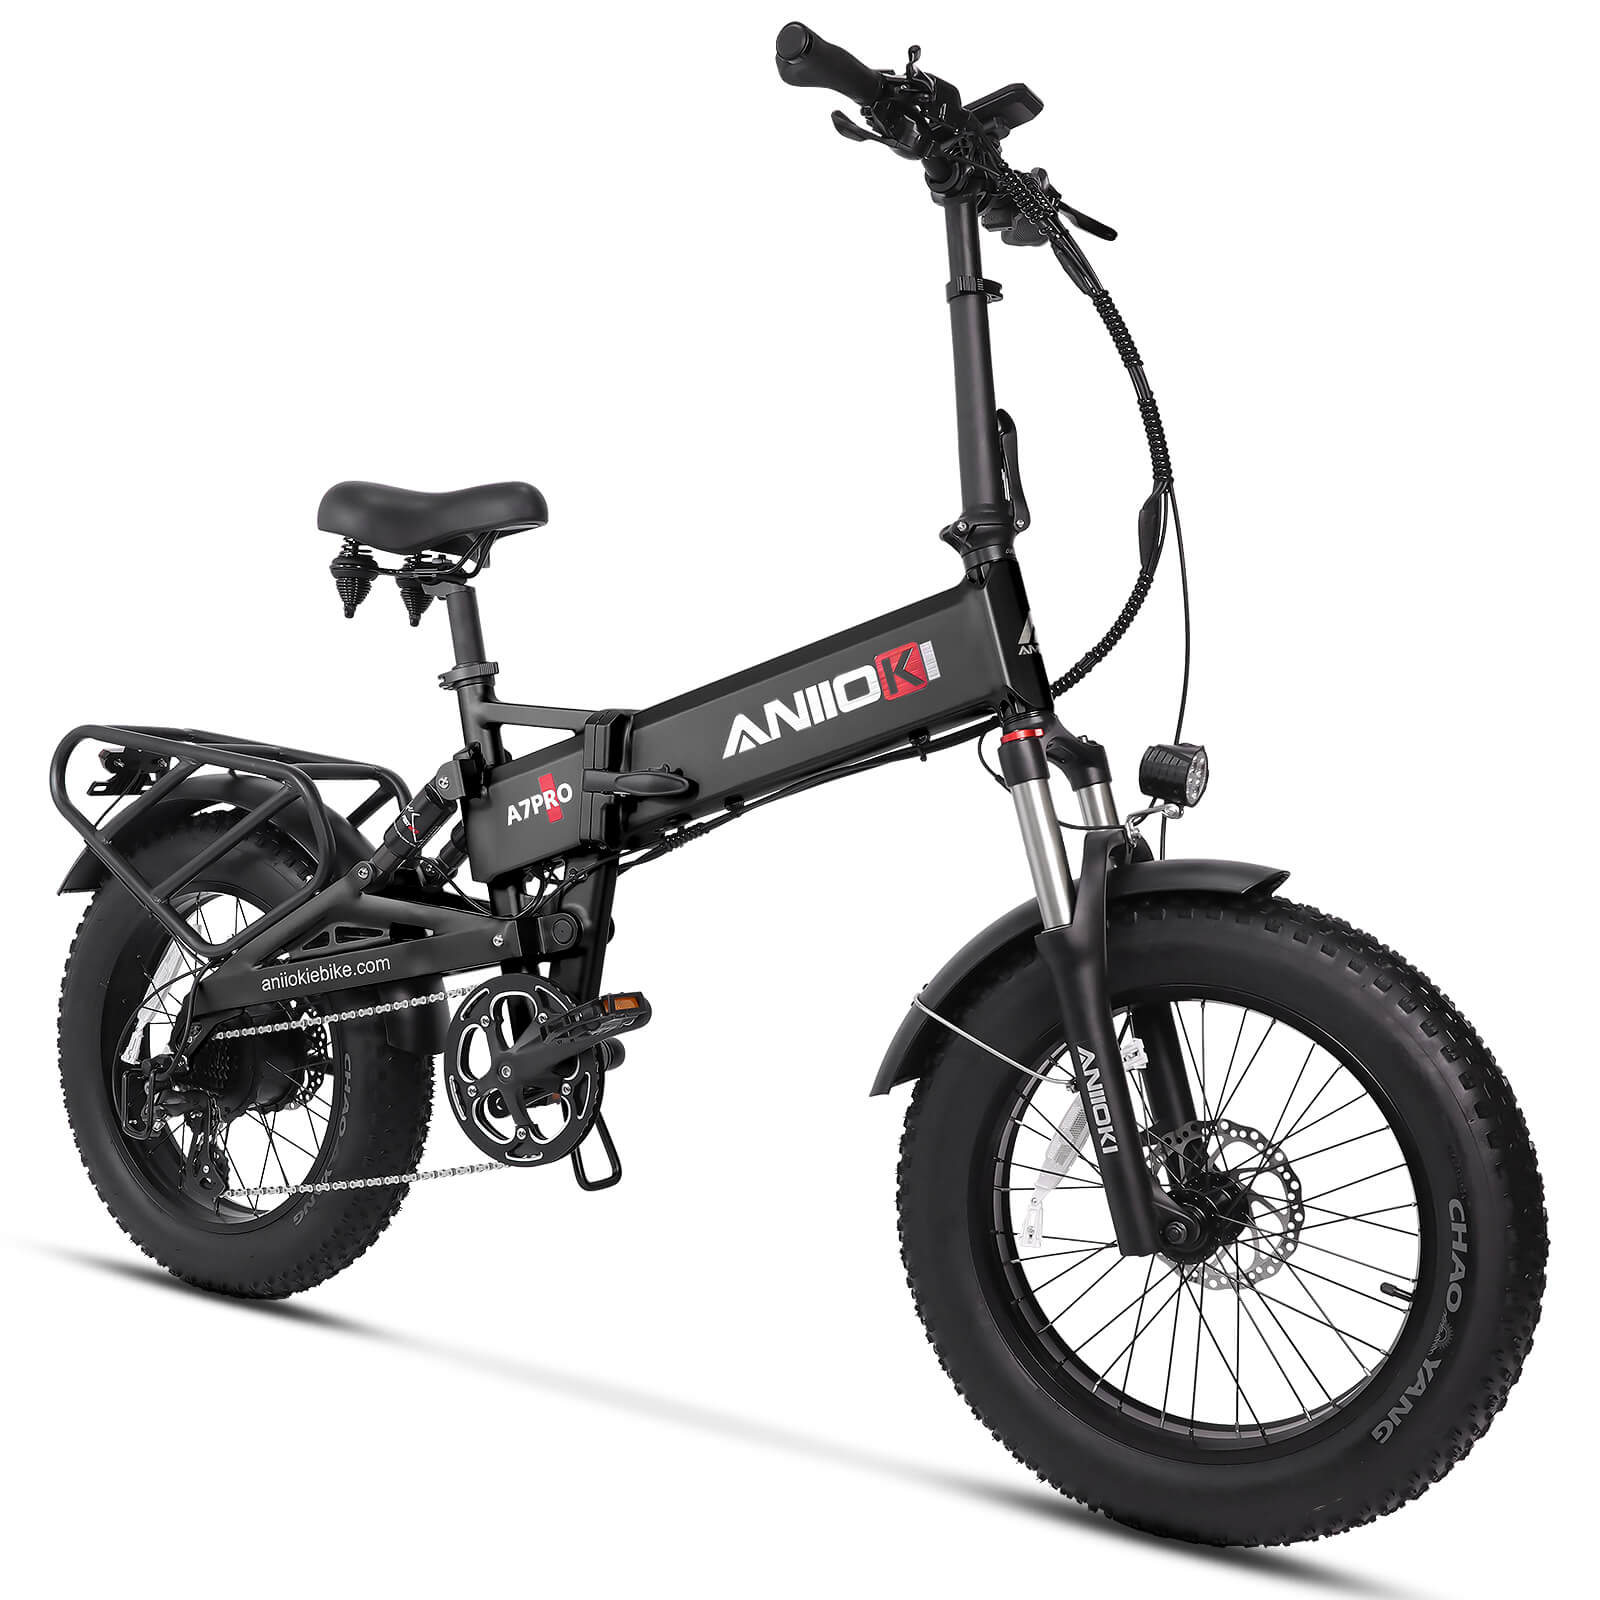 The Wallke A7-PRO is the king of e-bikes - with long range and hill-climbing capabilities